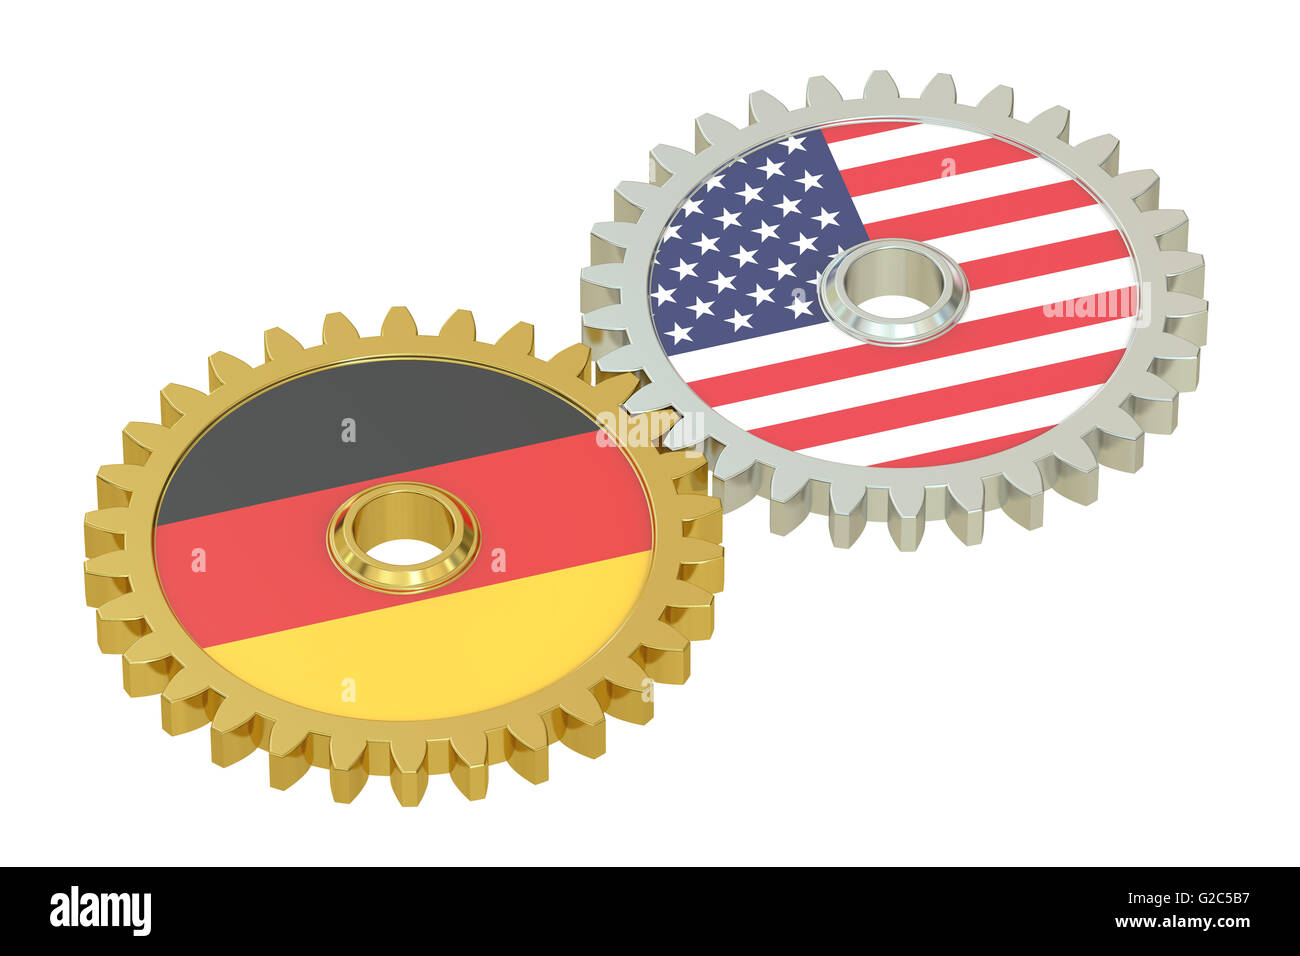 Germany and United States relations concept, flags on a gears. 3D rendering isolated on white Stock Photo